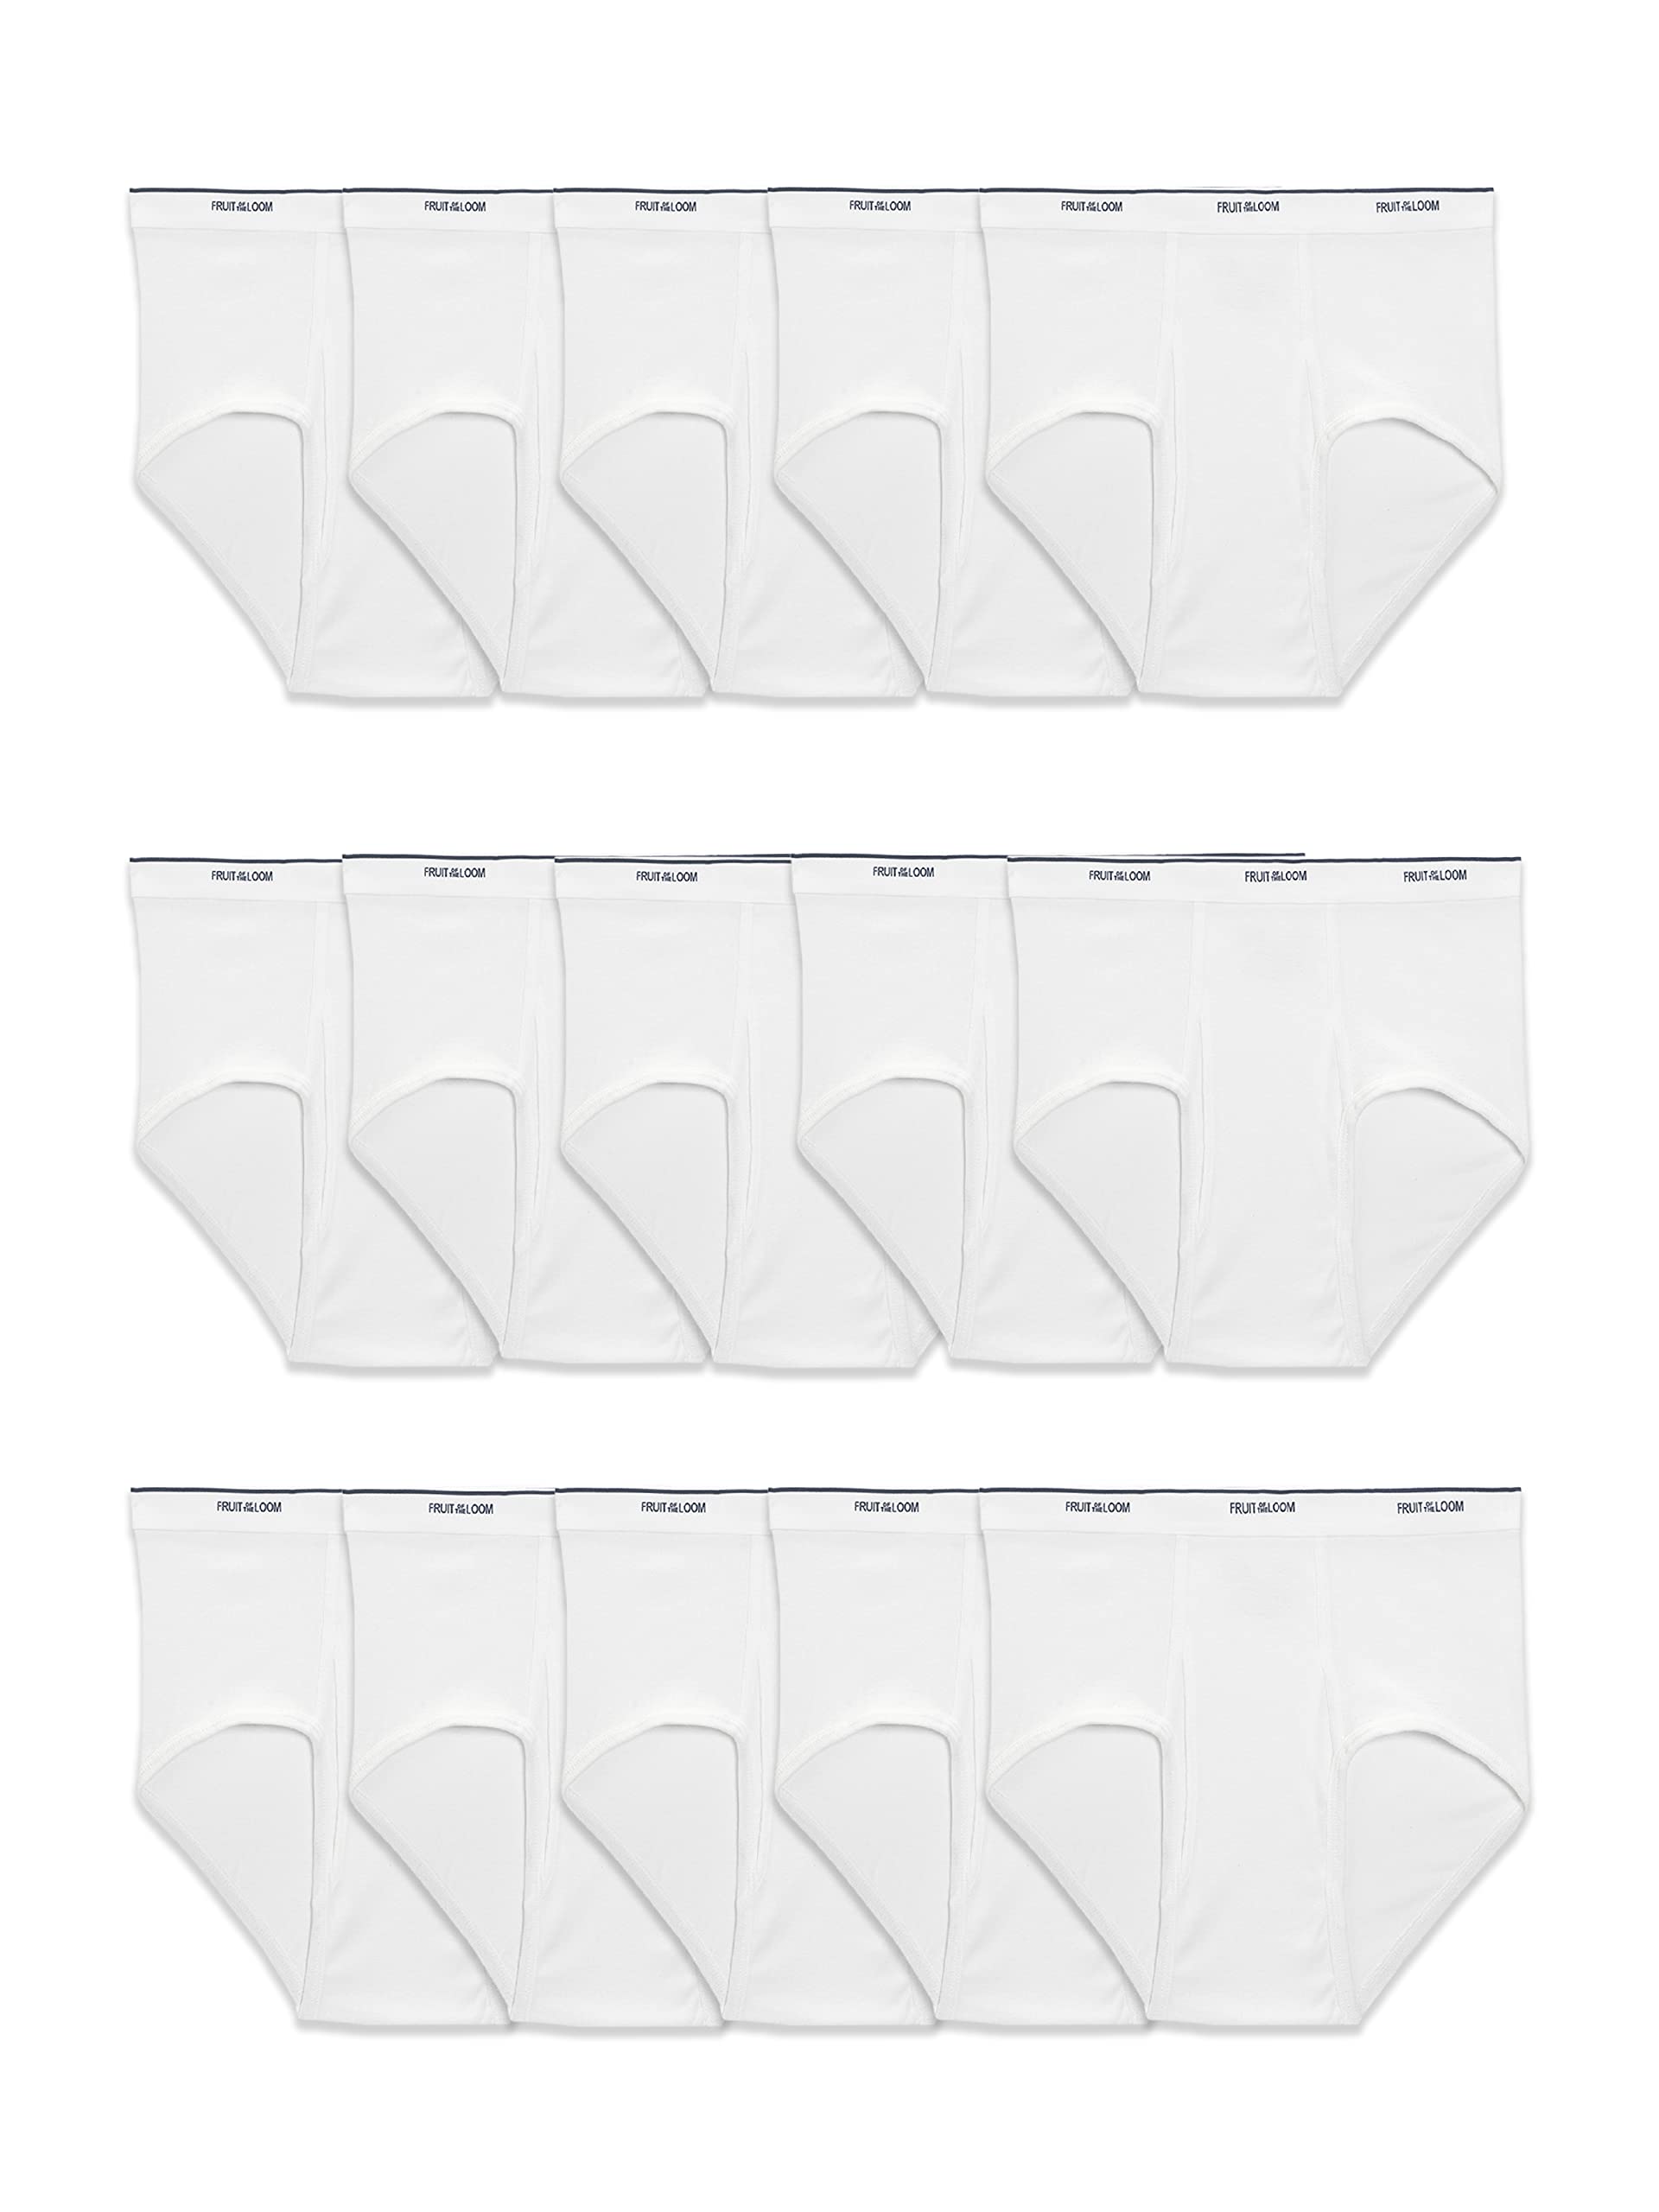 Fruit of the Loom Men's Tag Free White Cotton Briefs-Pack of 15-$16.35